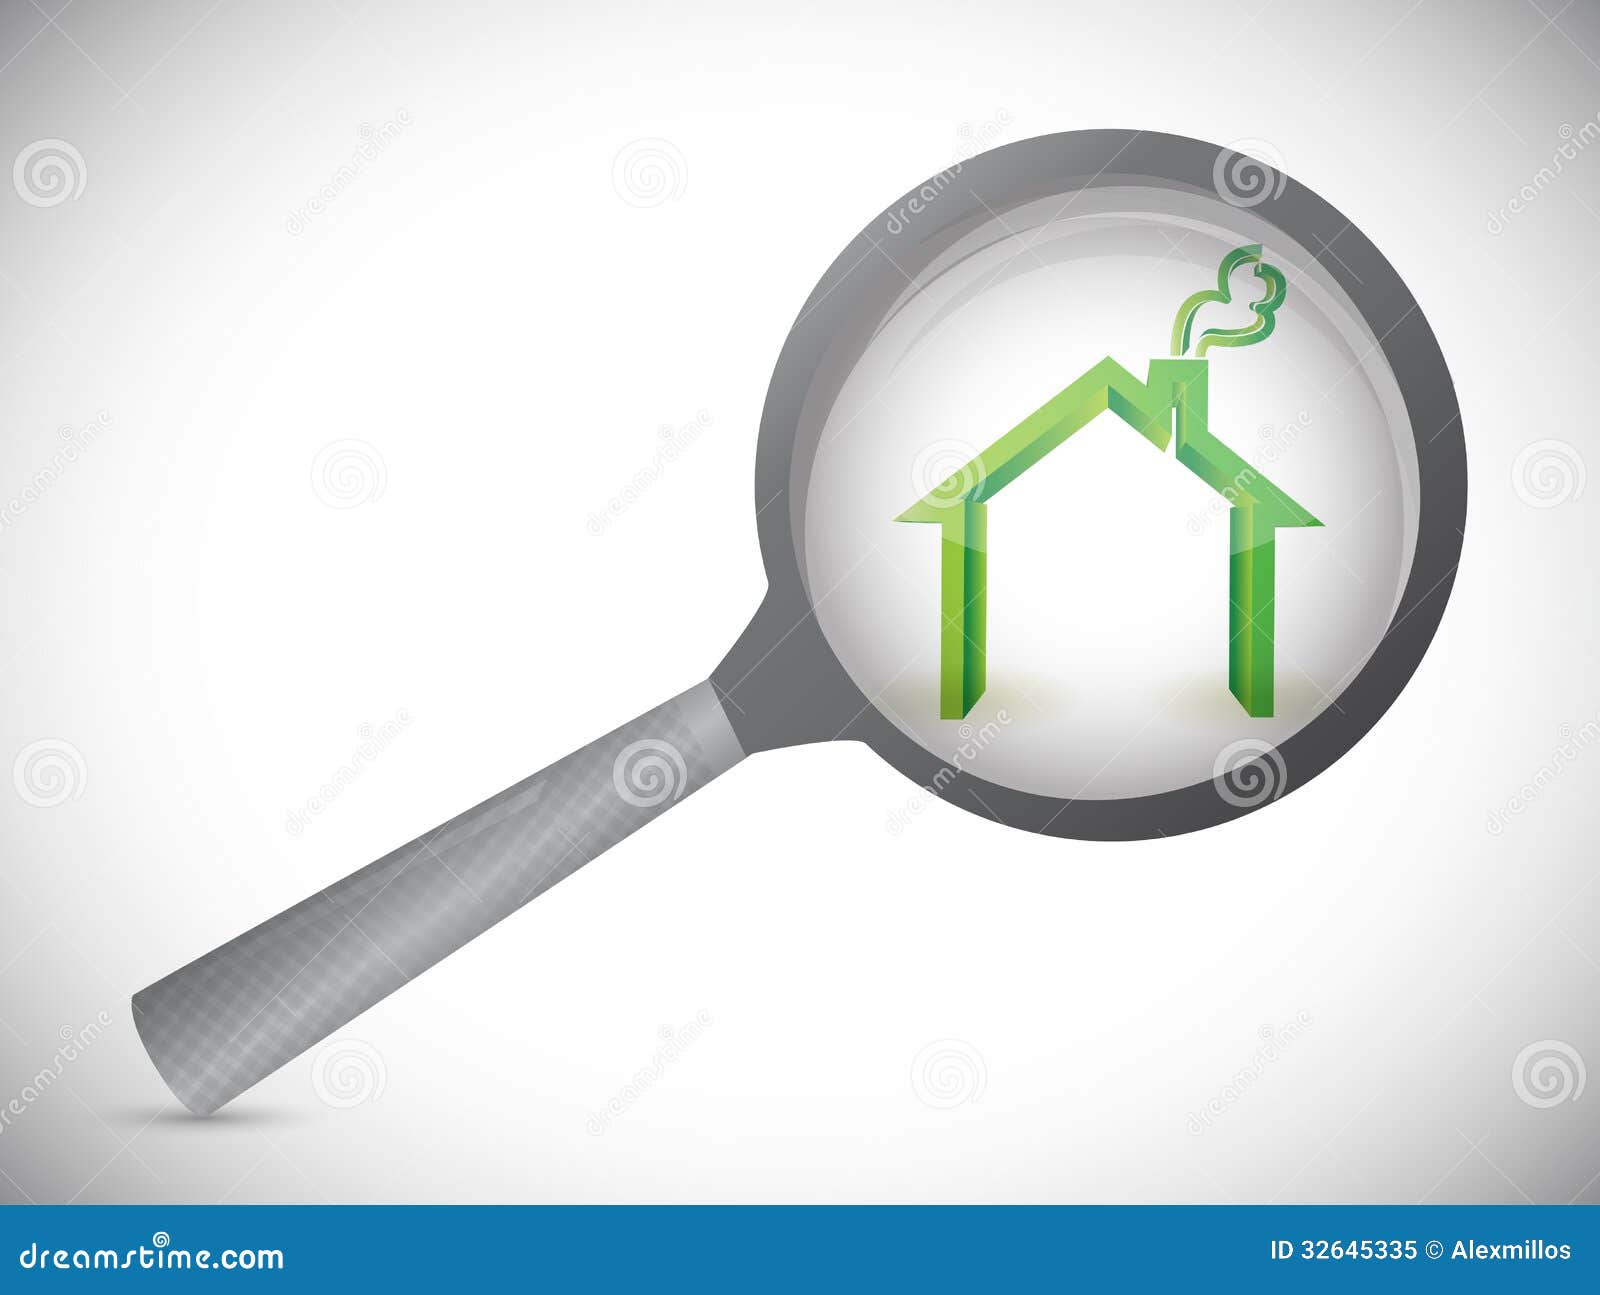 home inspection clipart - photo #10